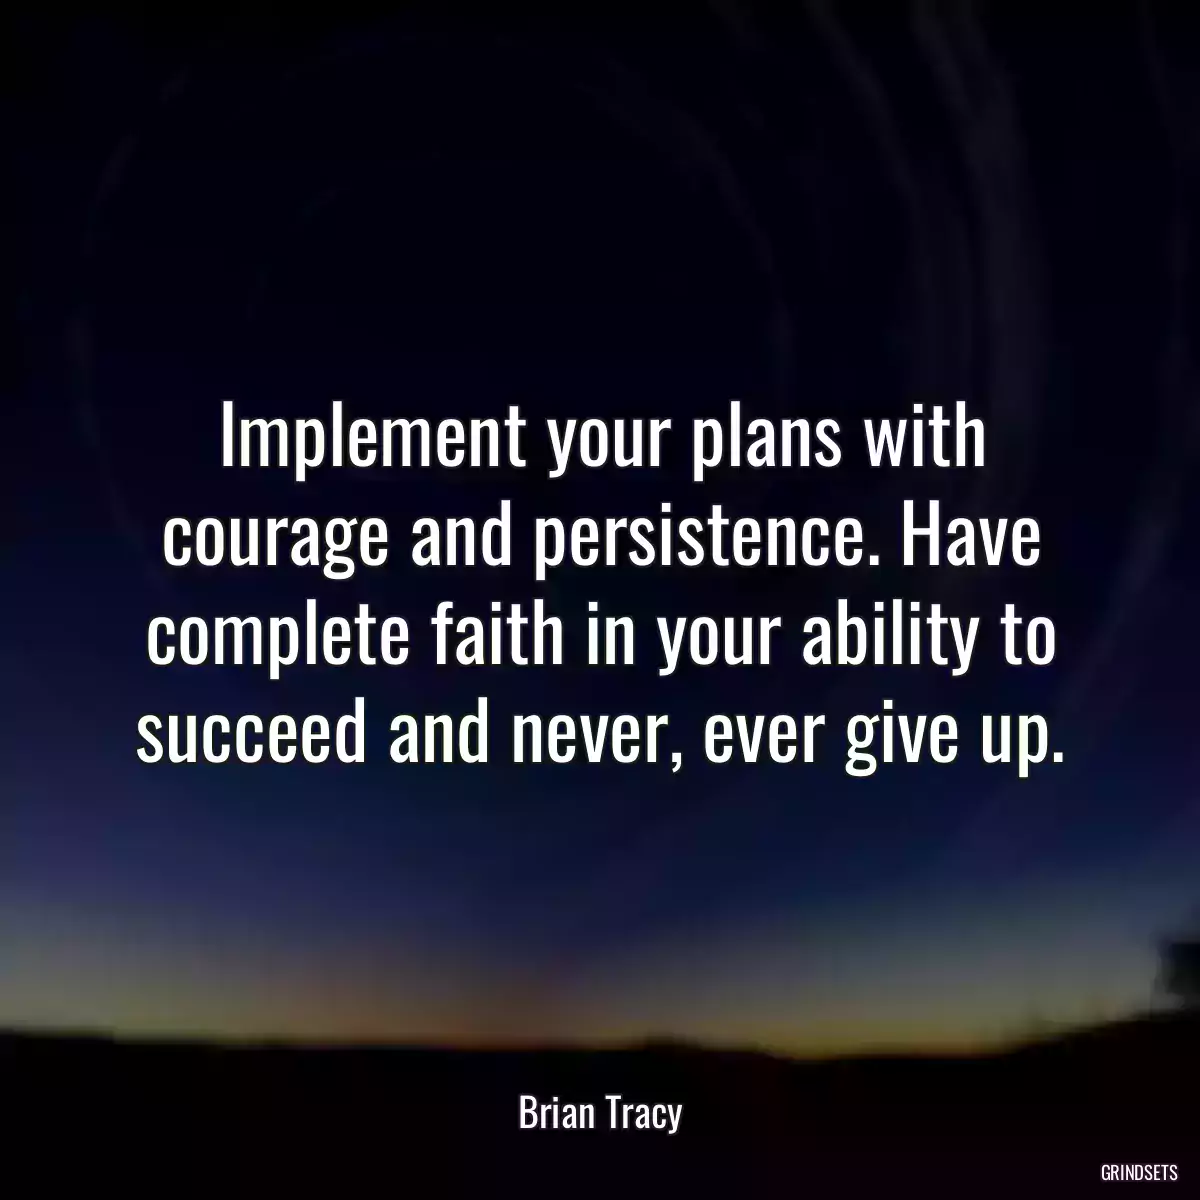 Implement your plans with courage and persistence. Have complete faith in your ability to succeed and never, ever give up.